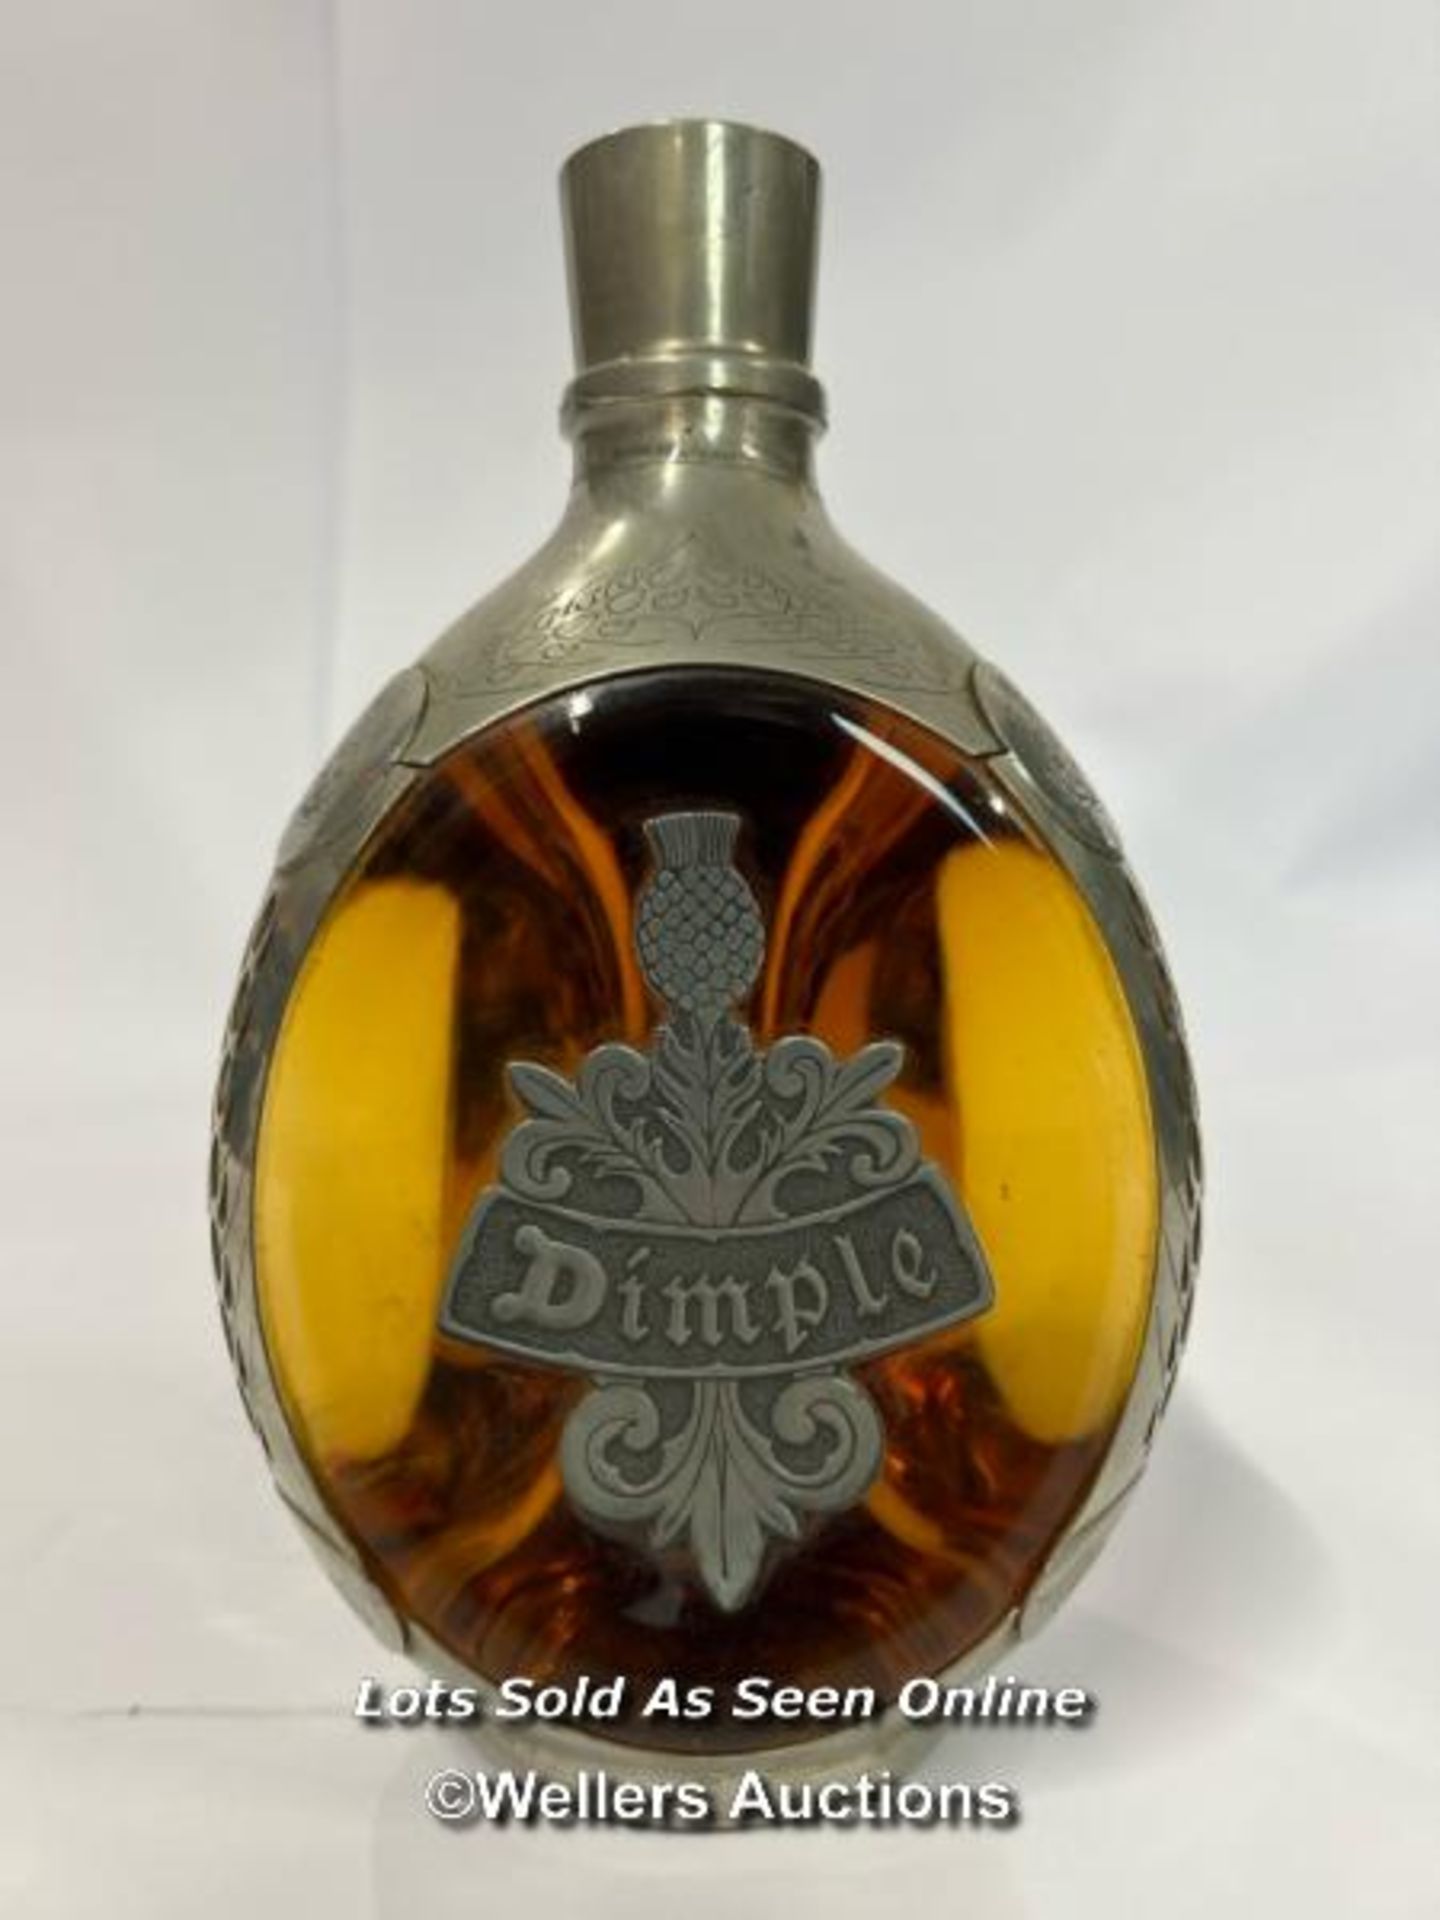 Dimple Haig 12yr whisky in decorative pewter bottle (opened) with a bottle of Dimple 15yr whisky, - Bild 2 aus 5